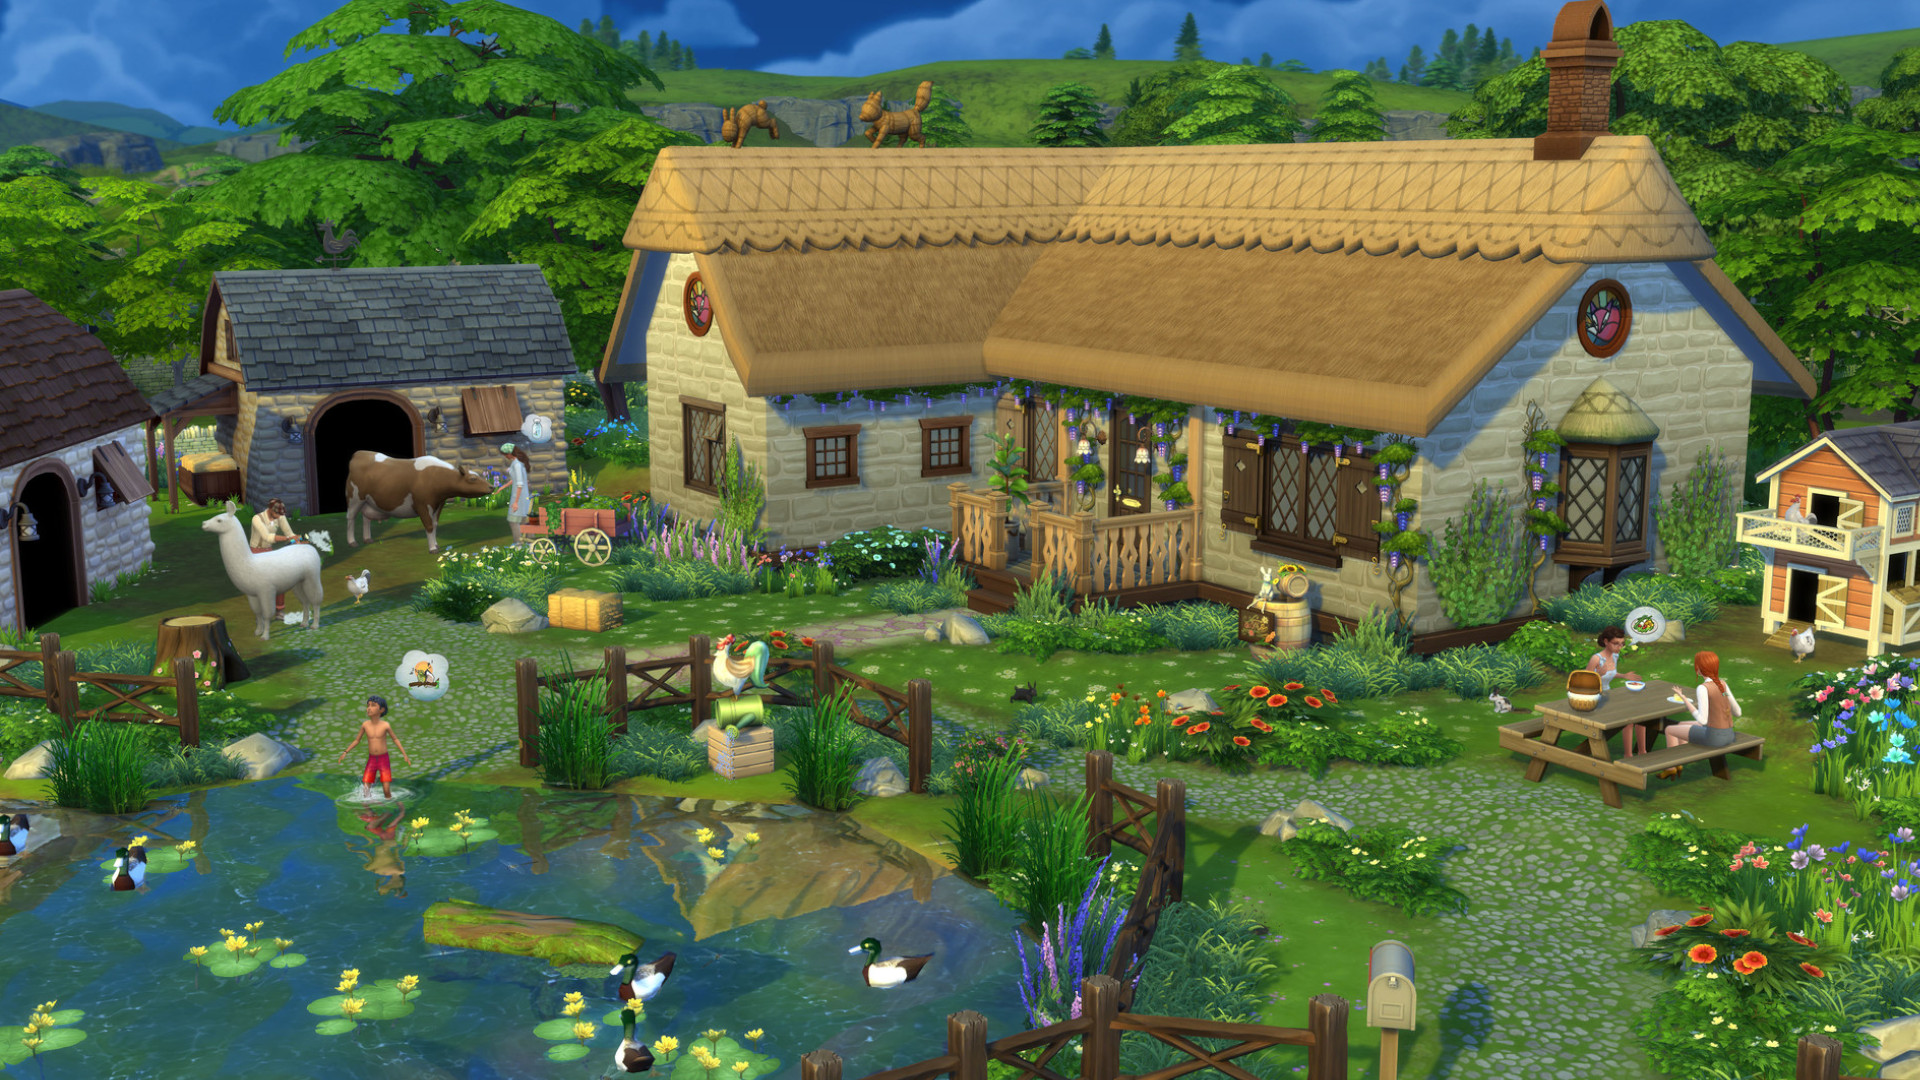 The Sims 4 finally has a pond tool (and alligators)